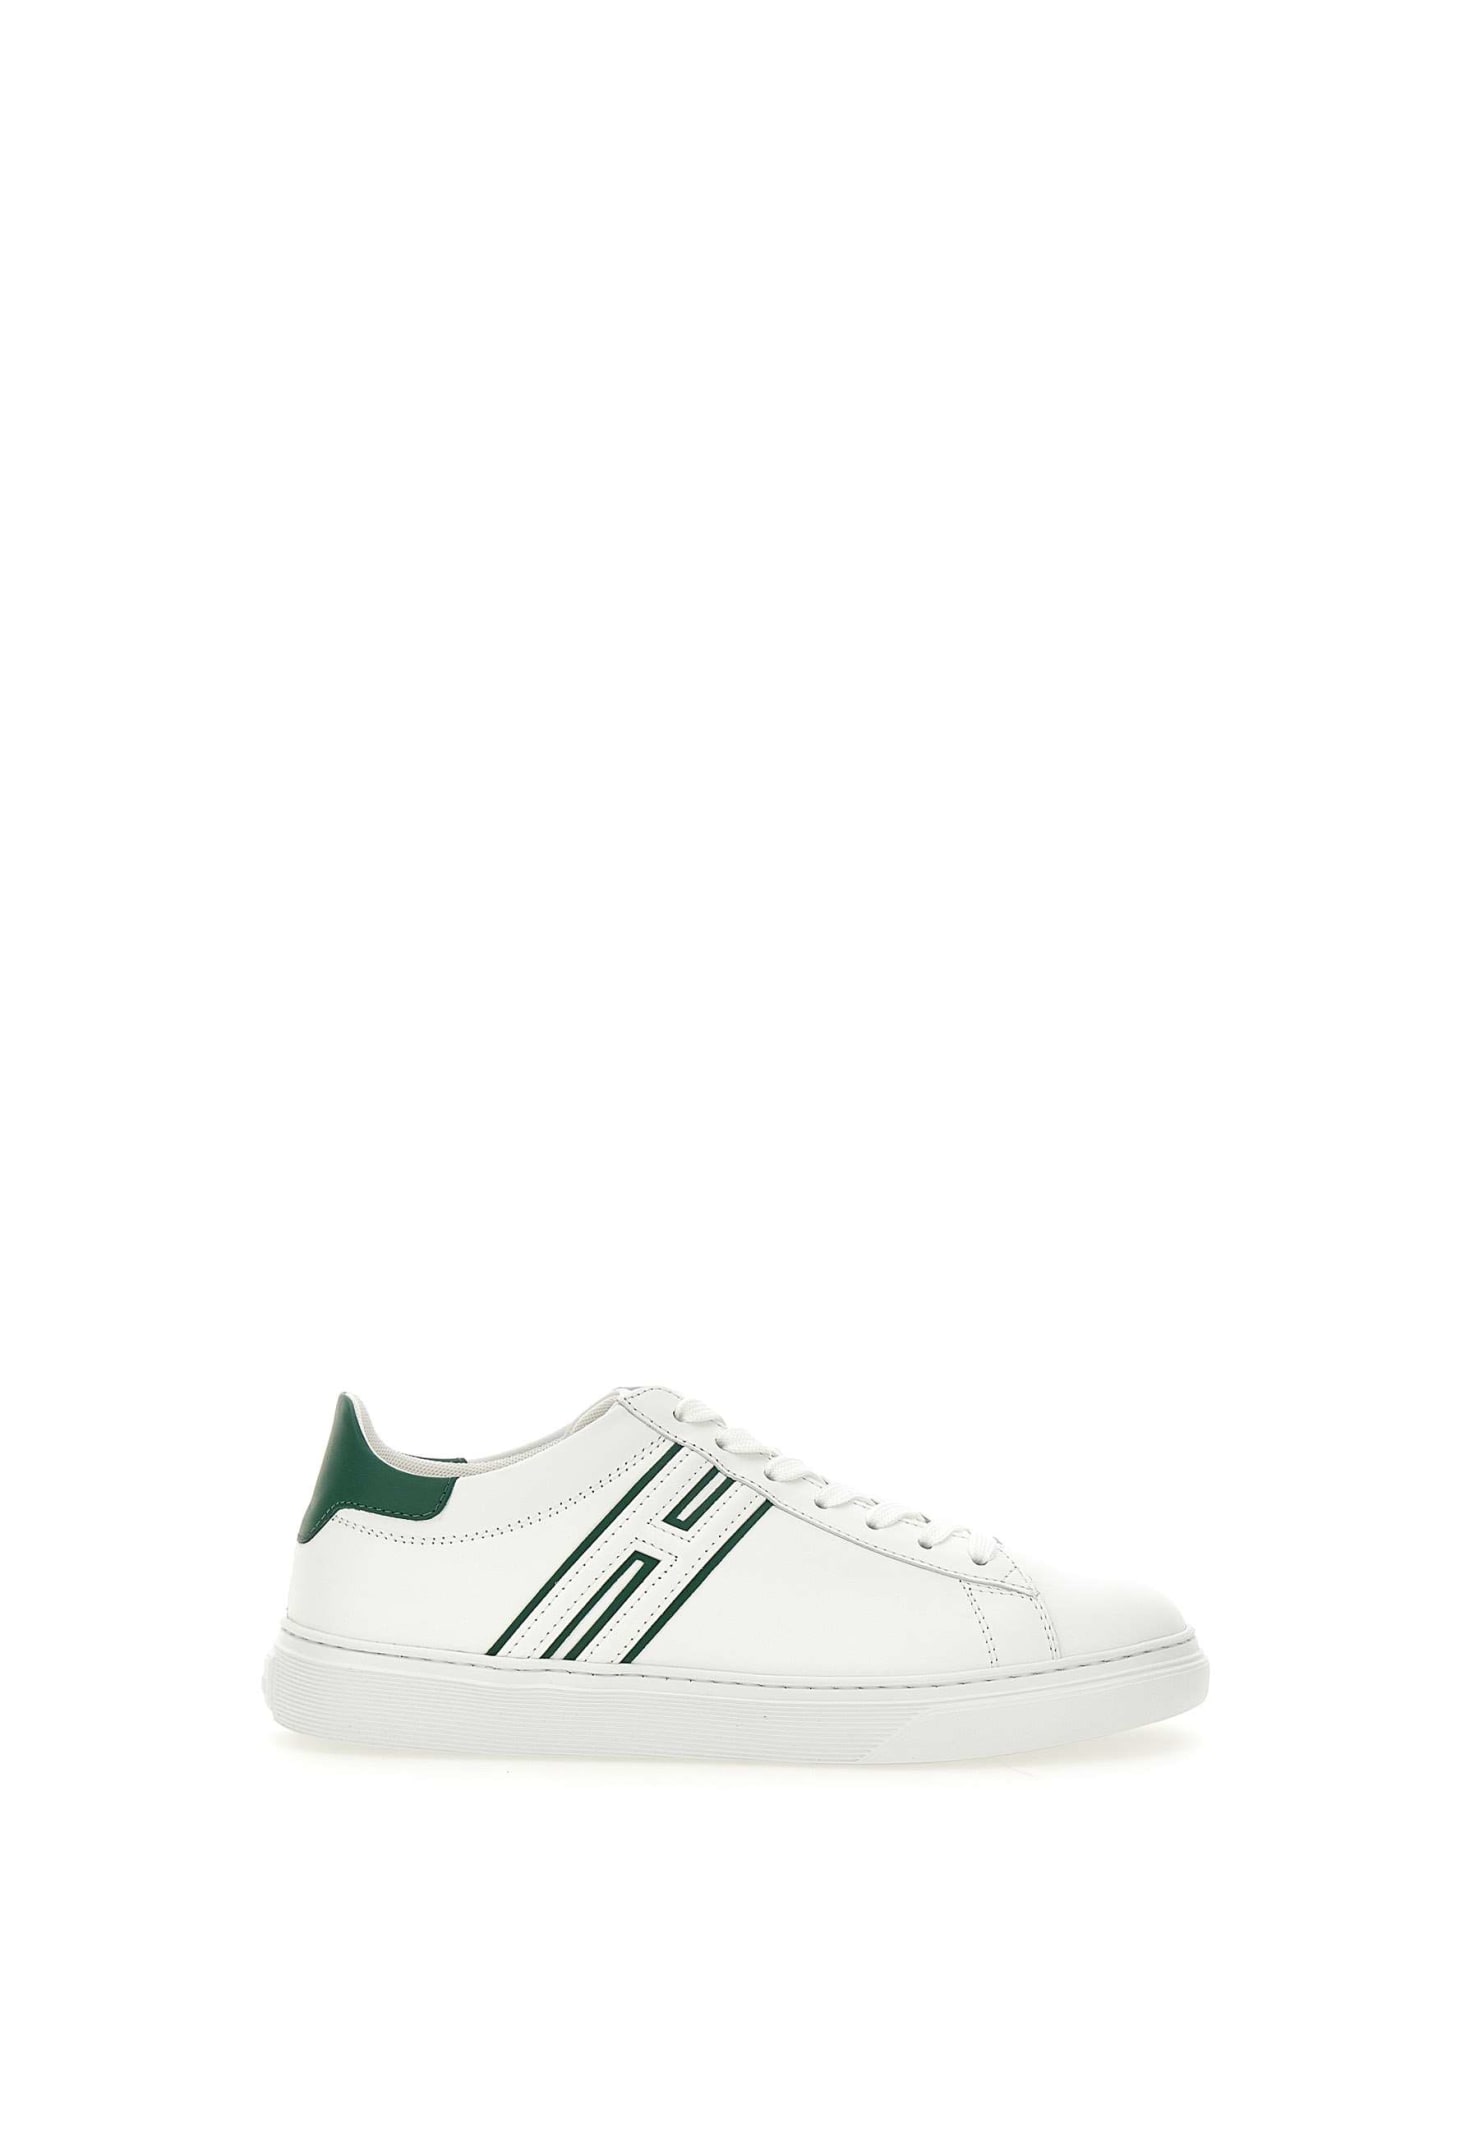 Hogan H365 Leather Sneakers In White